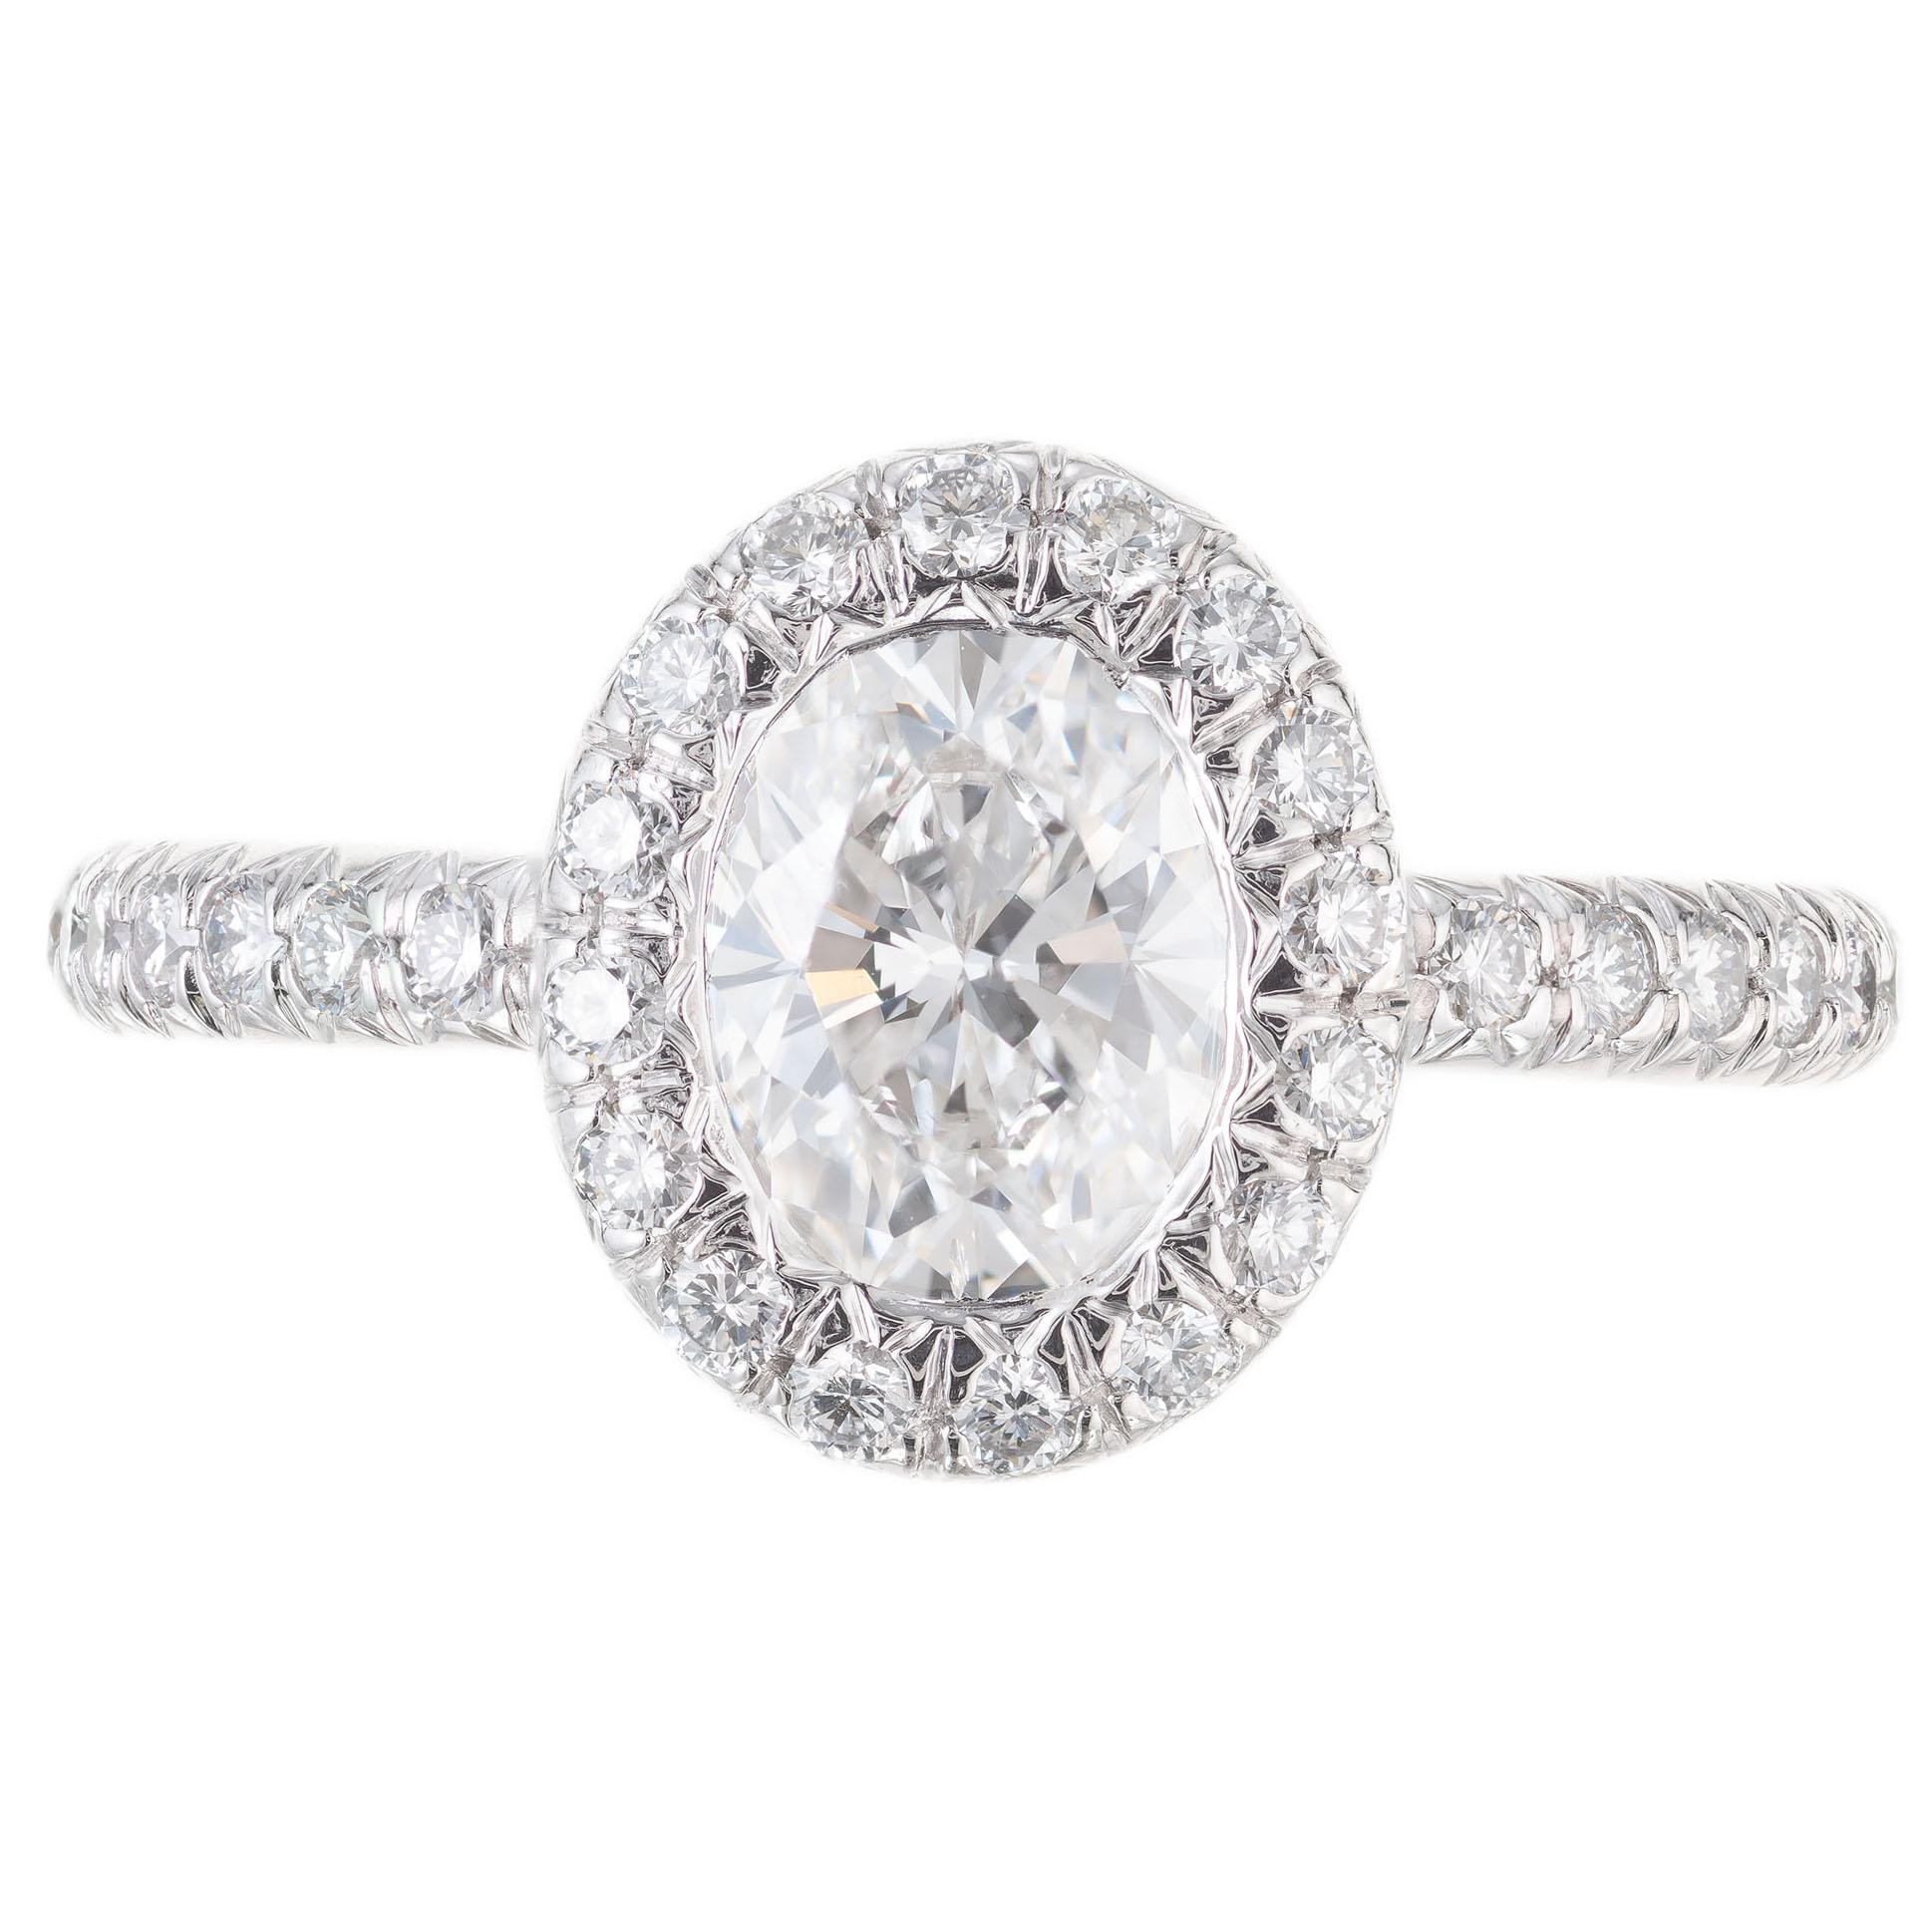  Kwiat oval diamond halo engagement ring. EGL certified 1.10ct oval center stone with a halo of round full cut diamonds in a platinum setting with diamonds along both sides of the shank and crown.  

1 oval diamond approx. total weight 1.10cts, EGL